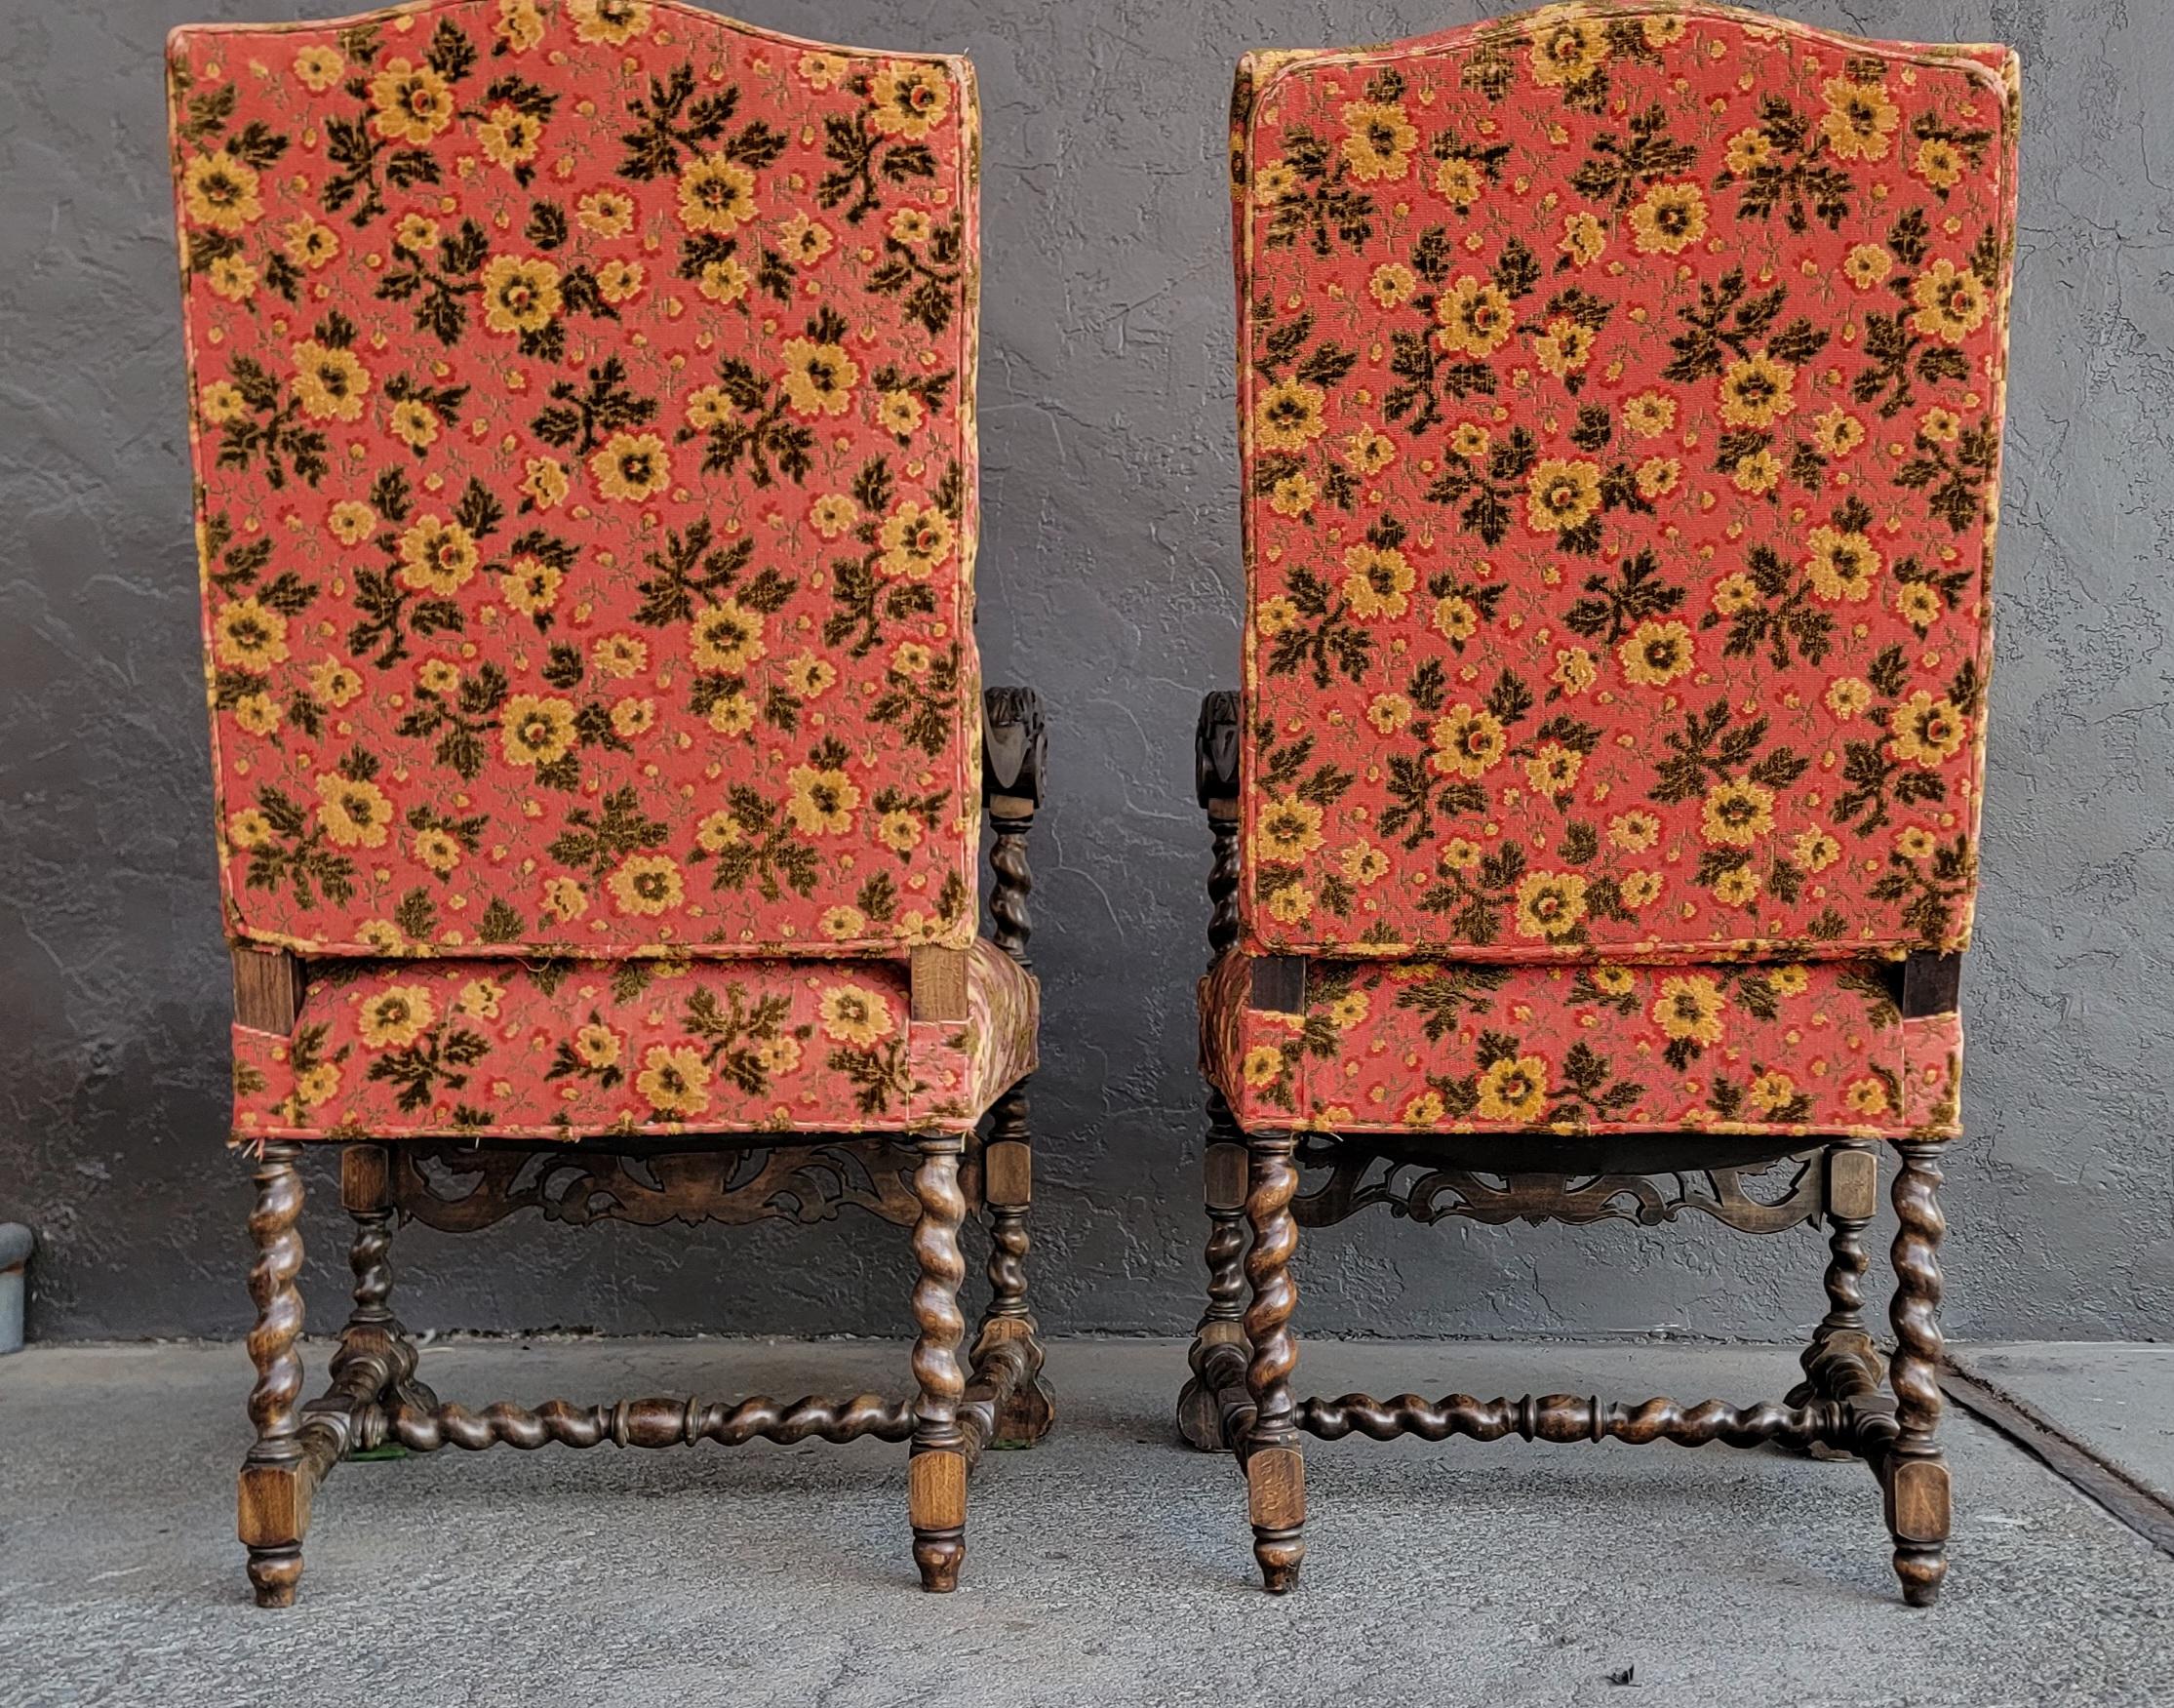 Gothic Revival Throne Chairs a Pair In Good Condition For Sale In Fulton, CA